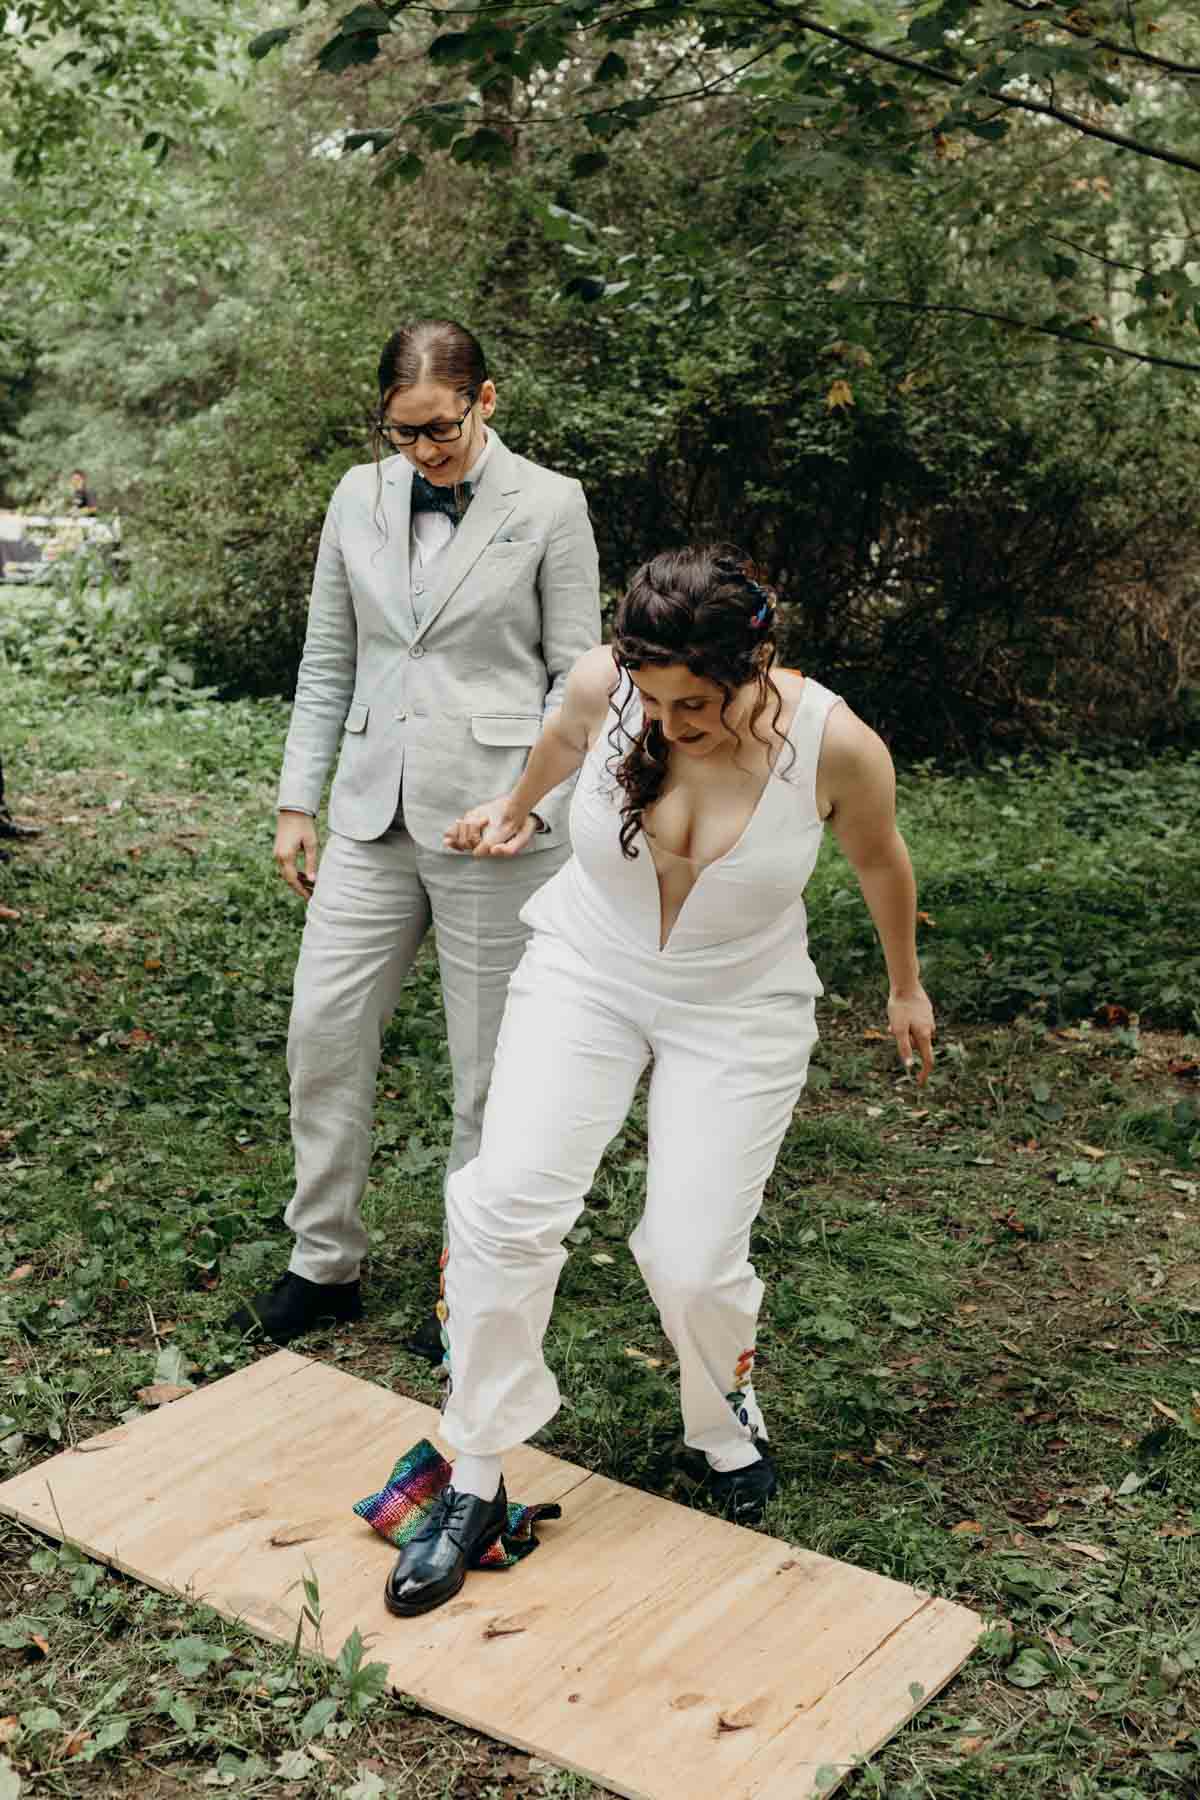 Jewish wedding tradition of breaking the glass by bride in the woods.  